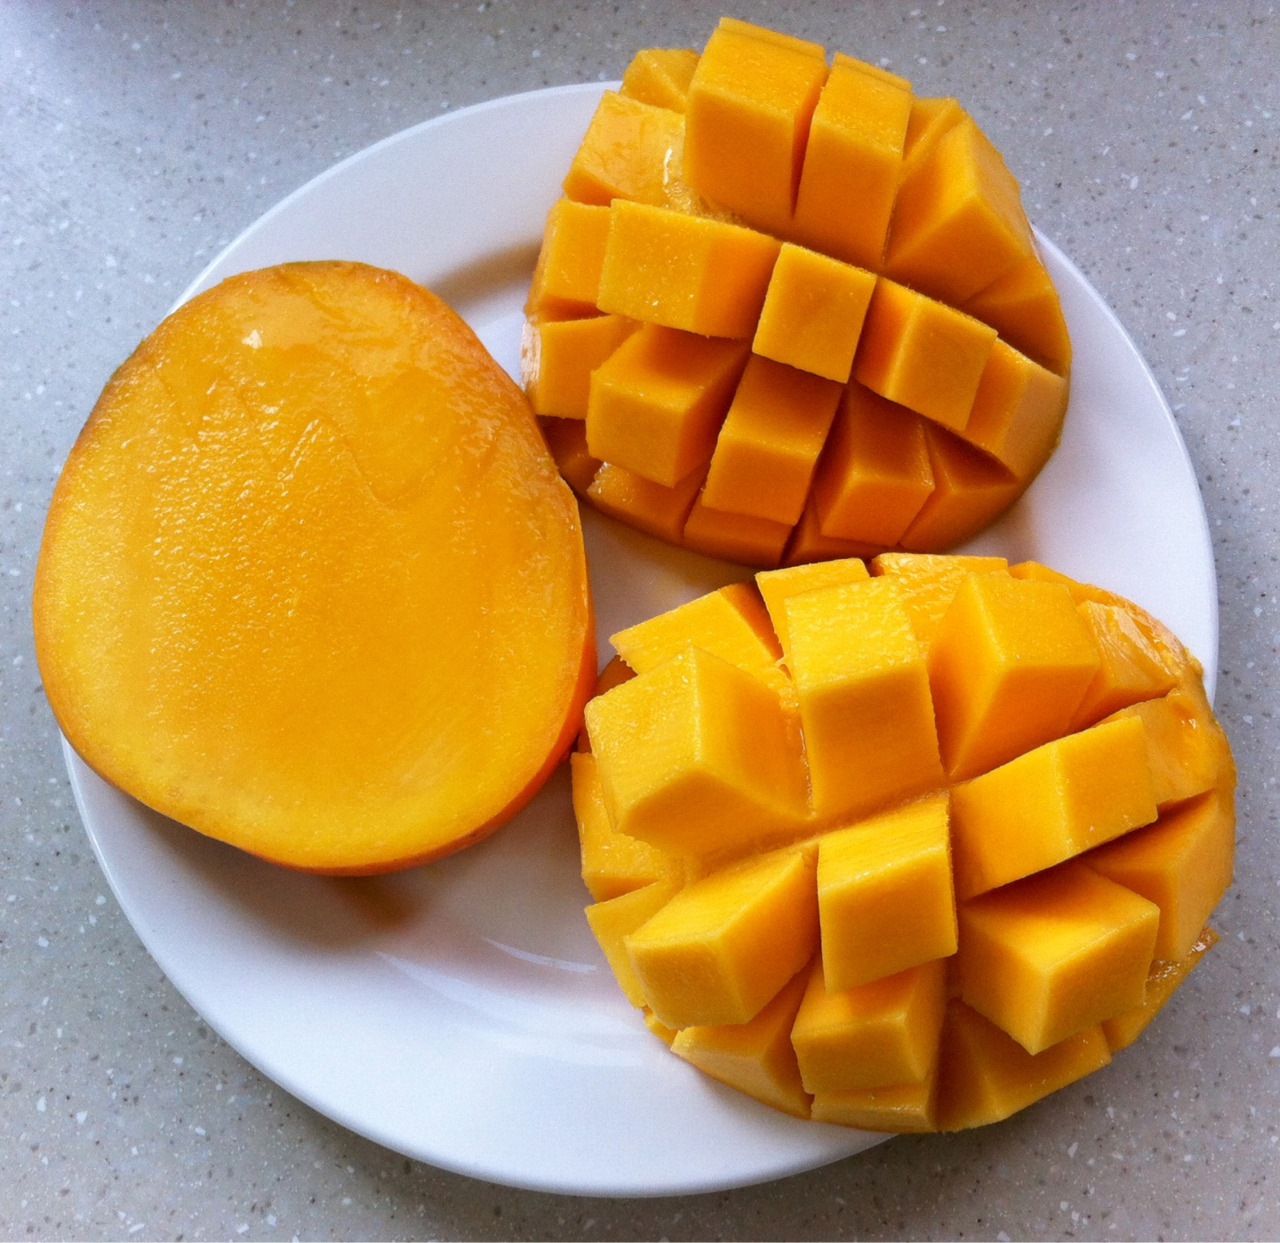 all-natu-ral:  Cold mango on a hot day 👌 